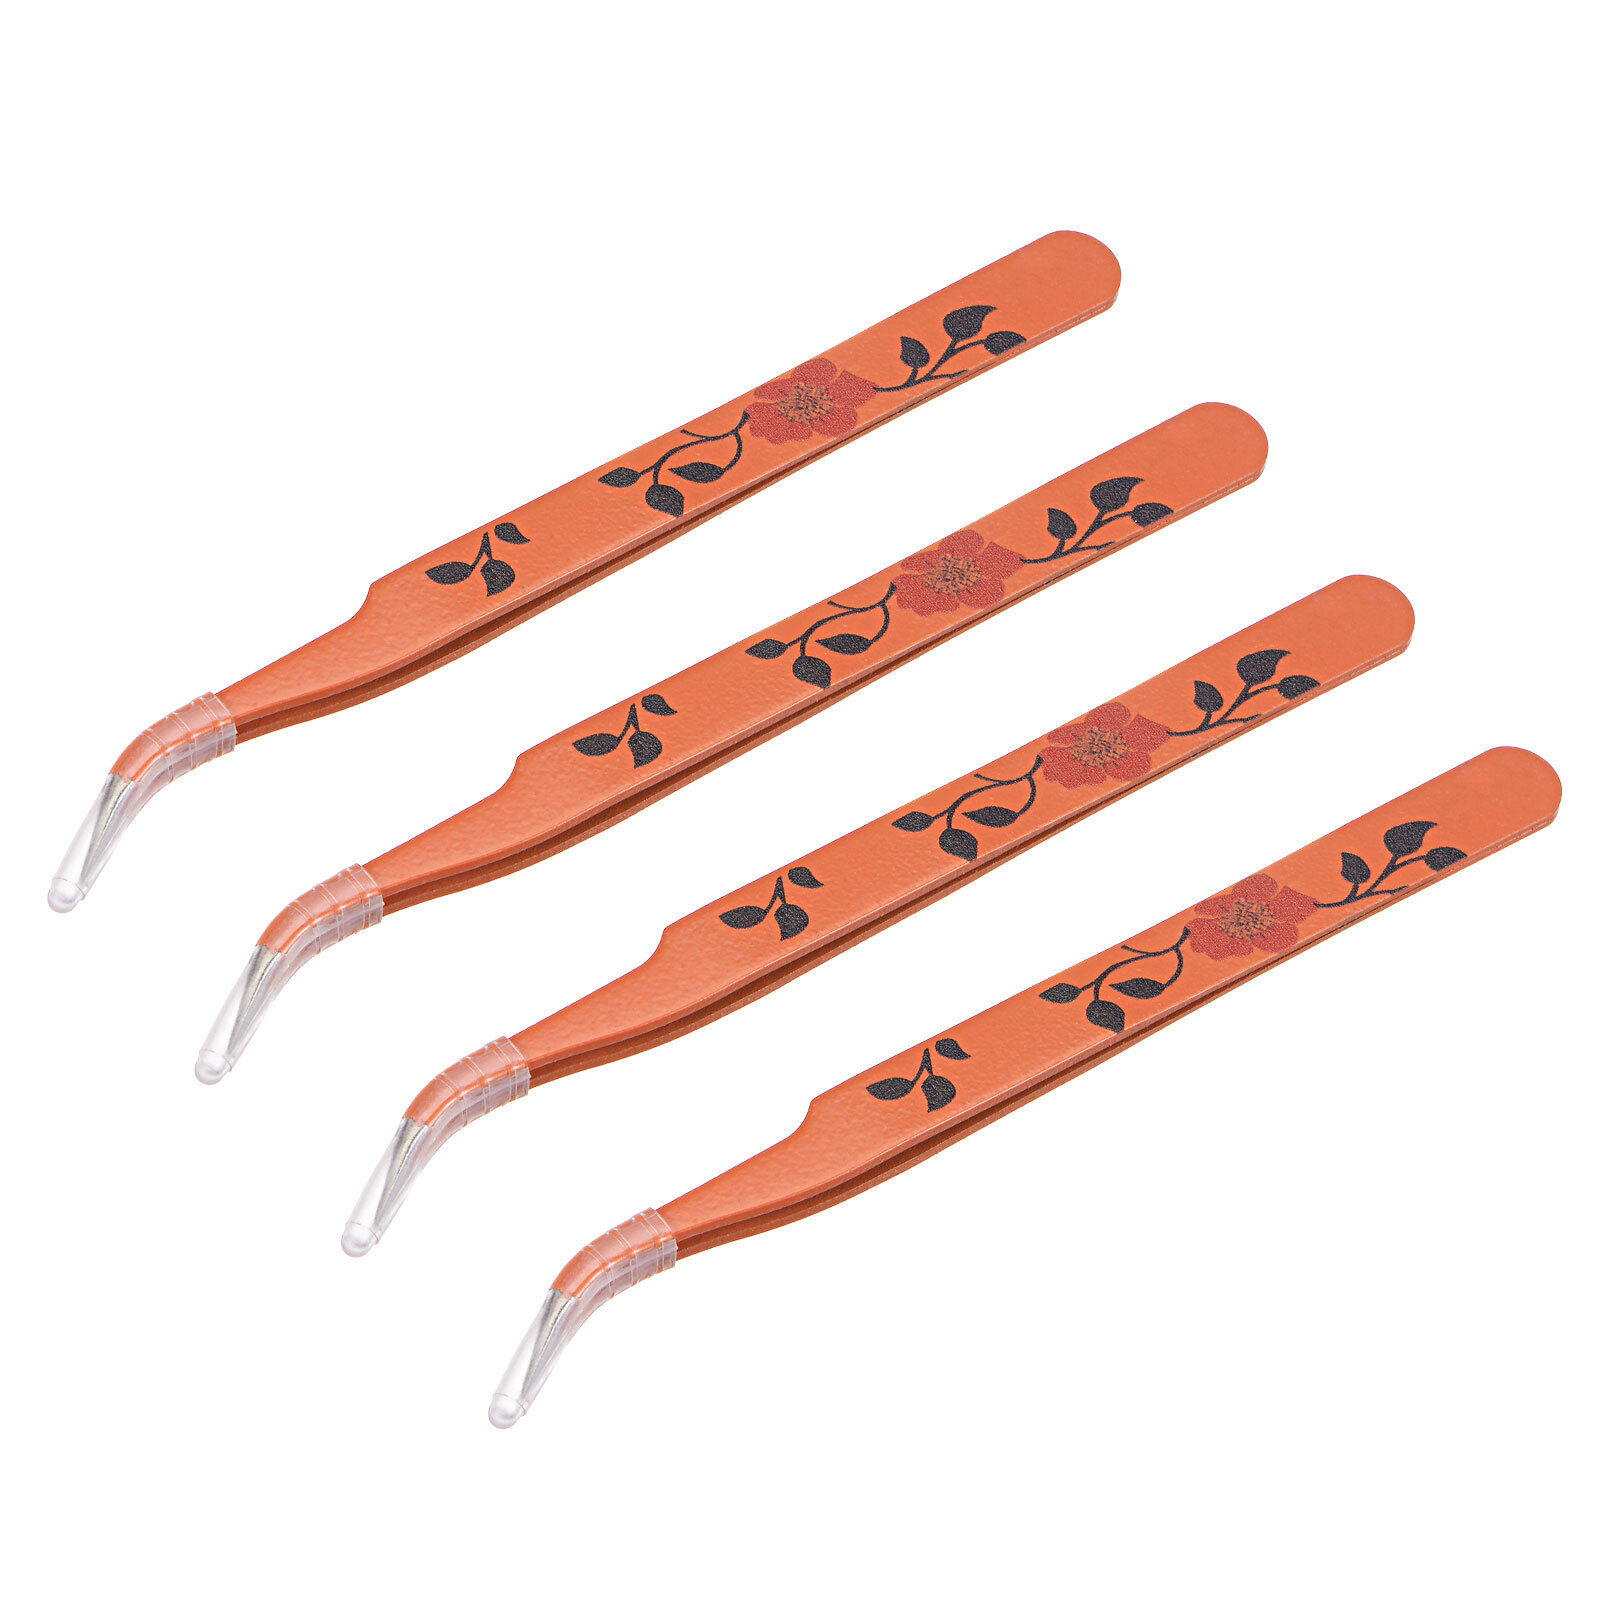 Precision Curved Tip Tweezer Stainless Steel Coral With Flower Print 4pcs